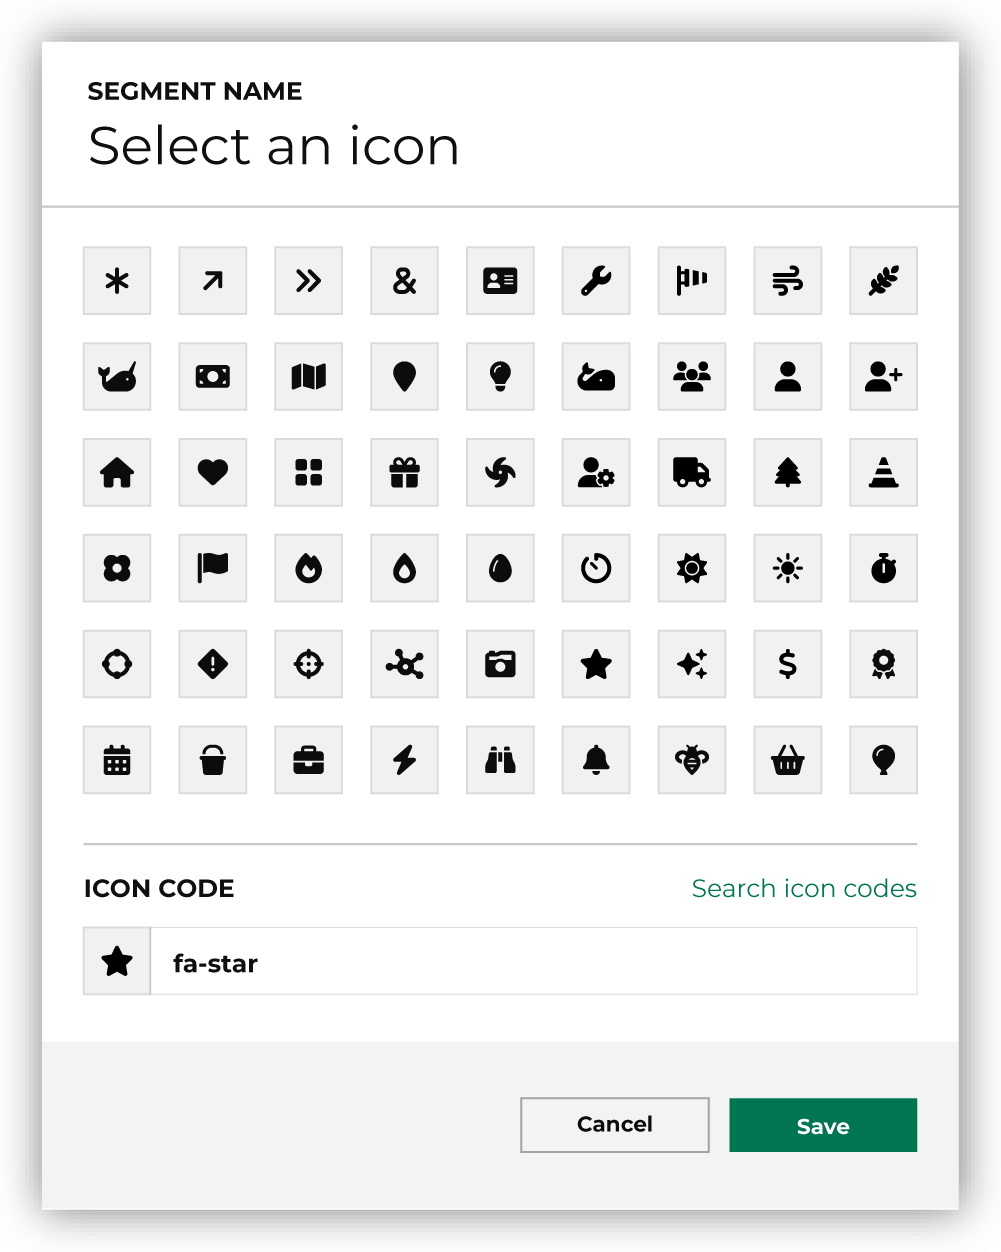 Select an icon to associate with each recommended segment.